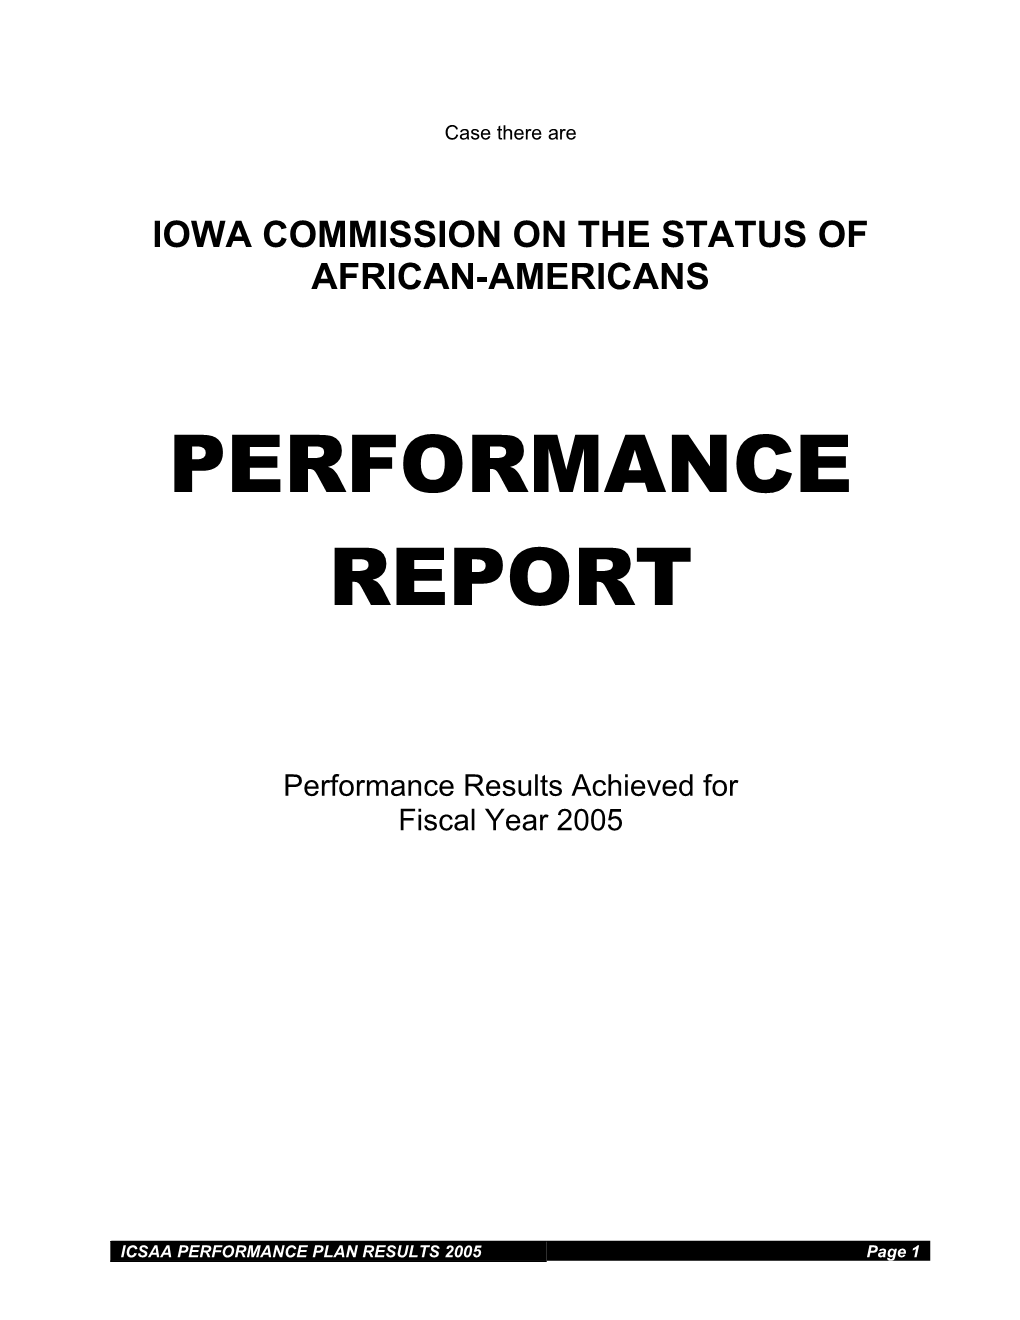 Iowa Commission on the Status of African-Americans